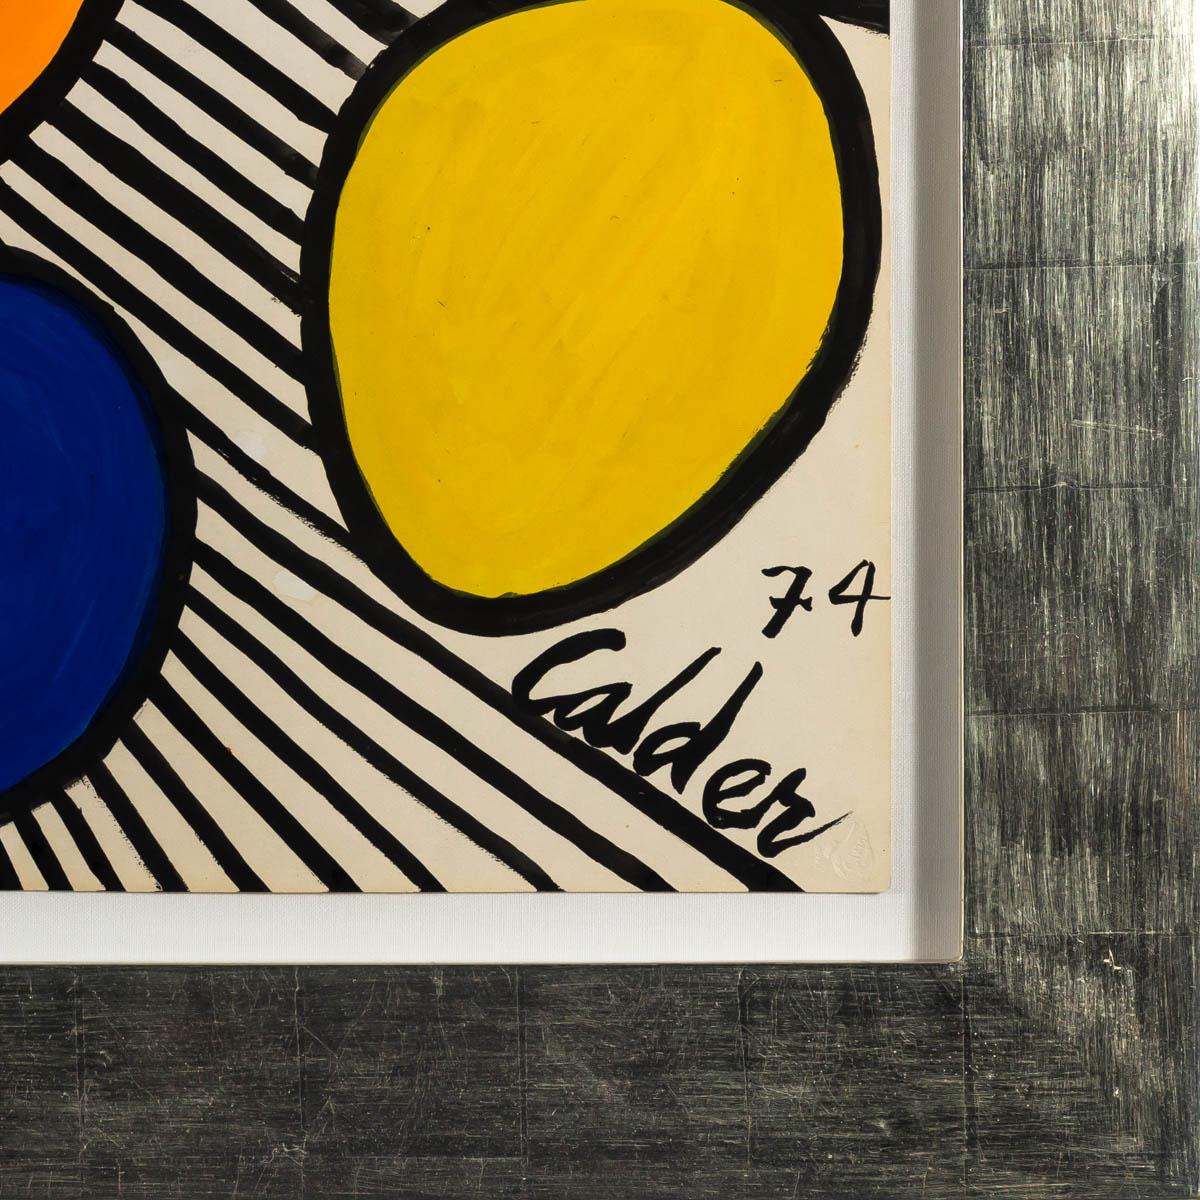 Bowling, 1974 - Painting by Alexander Calder